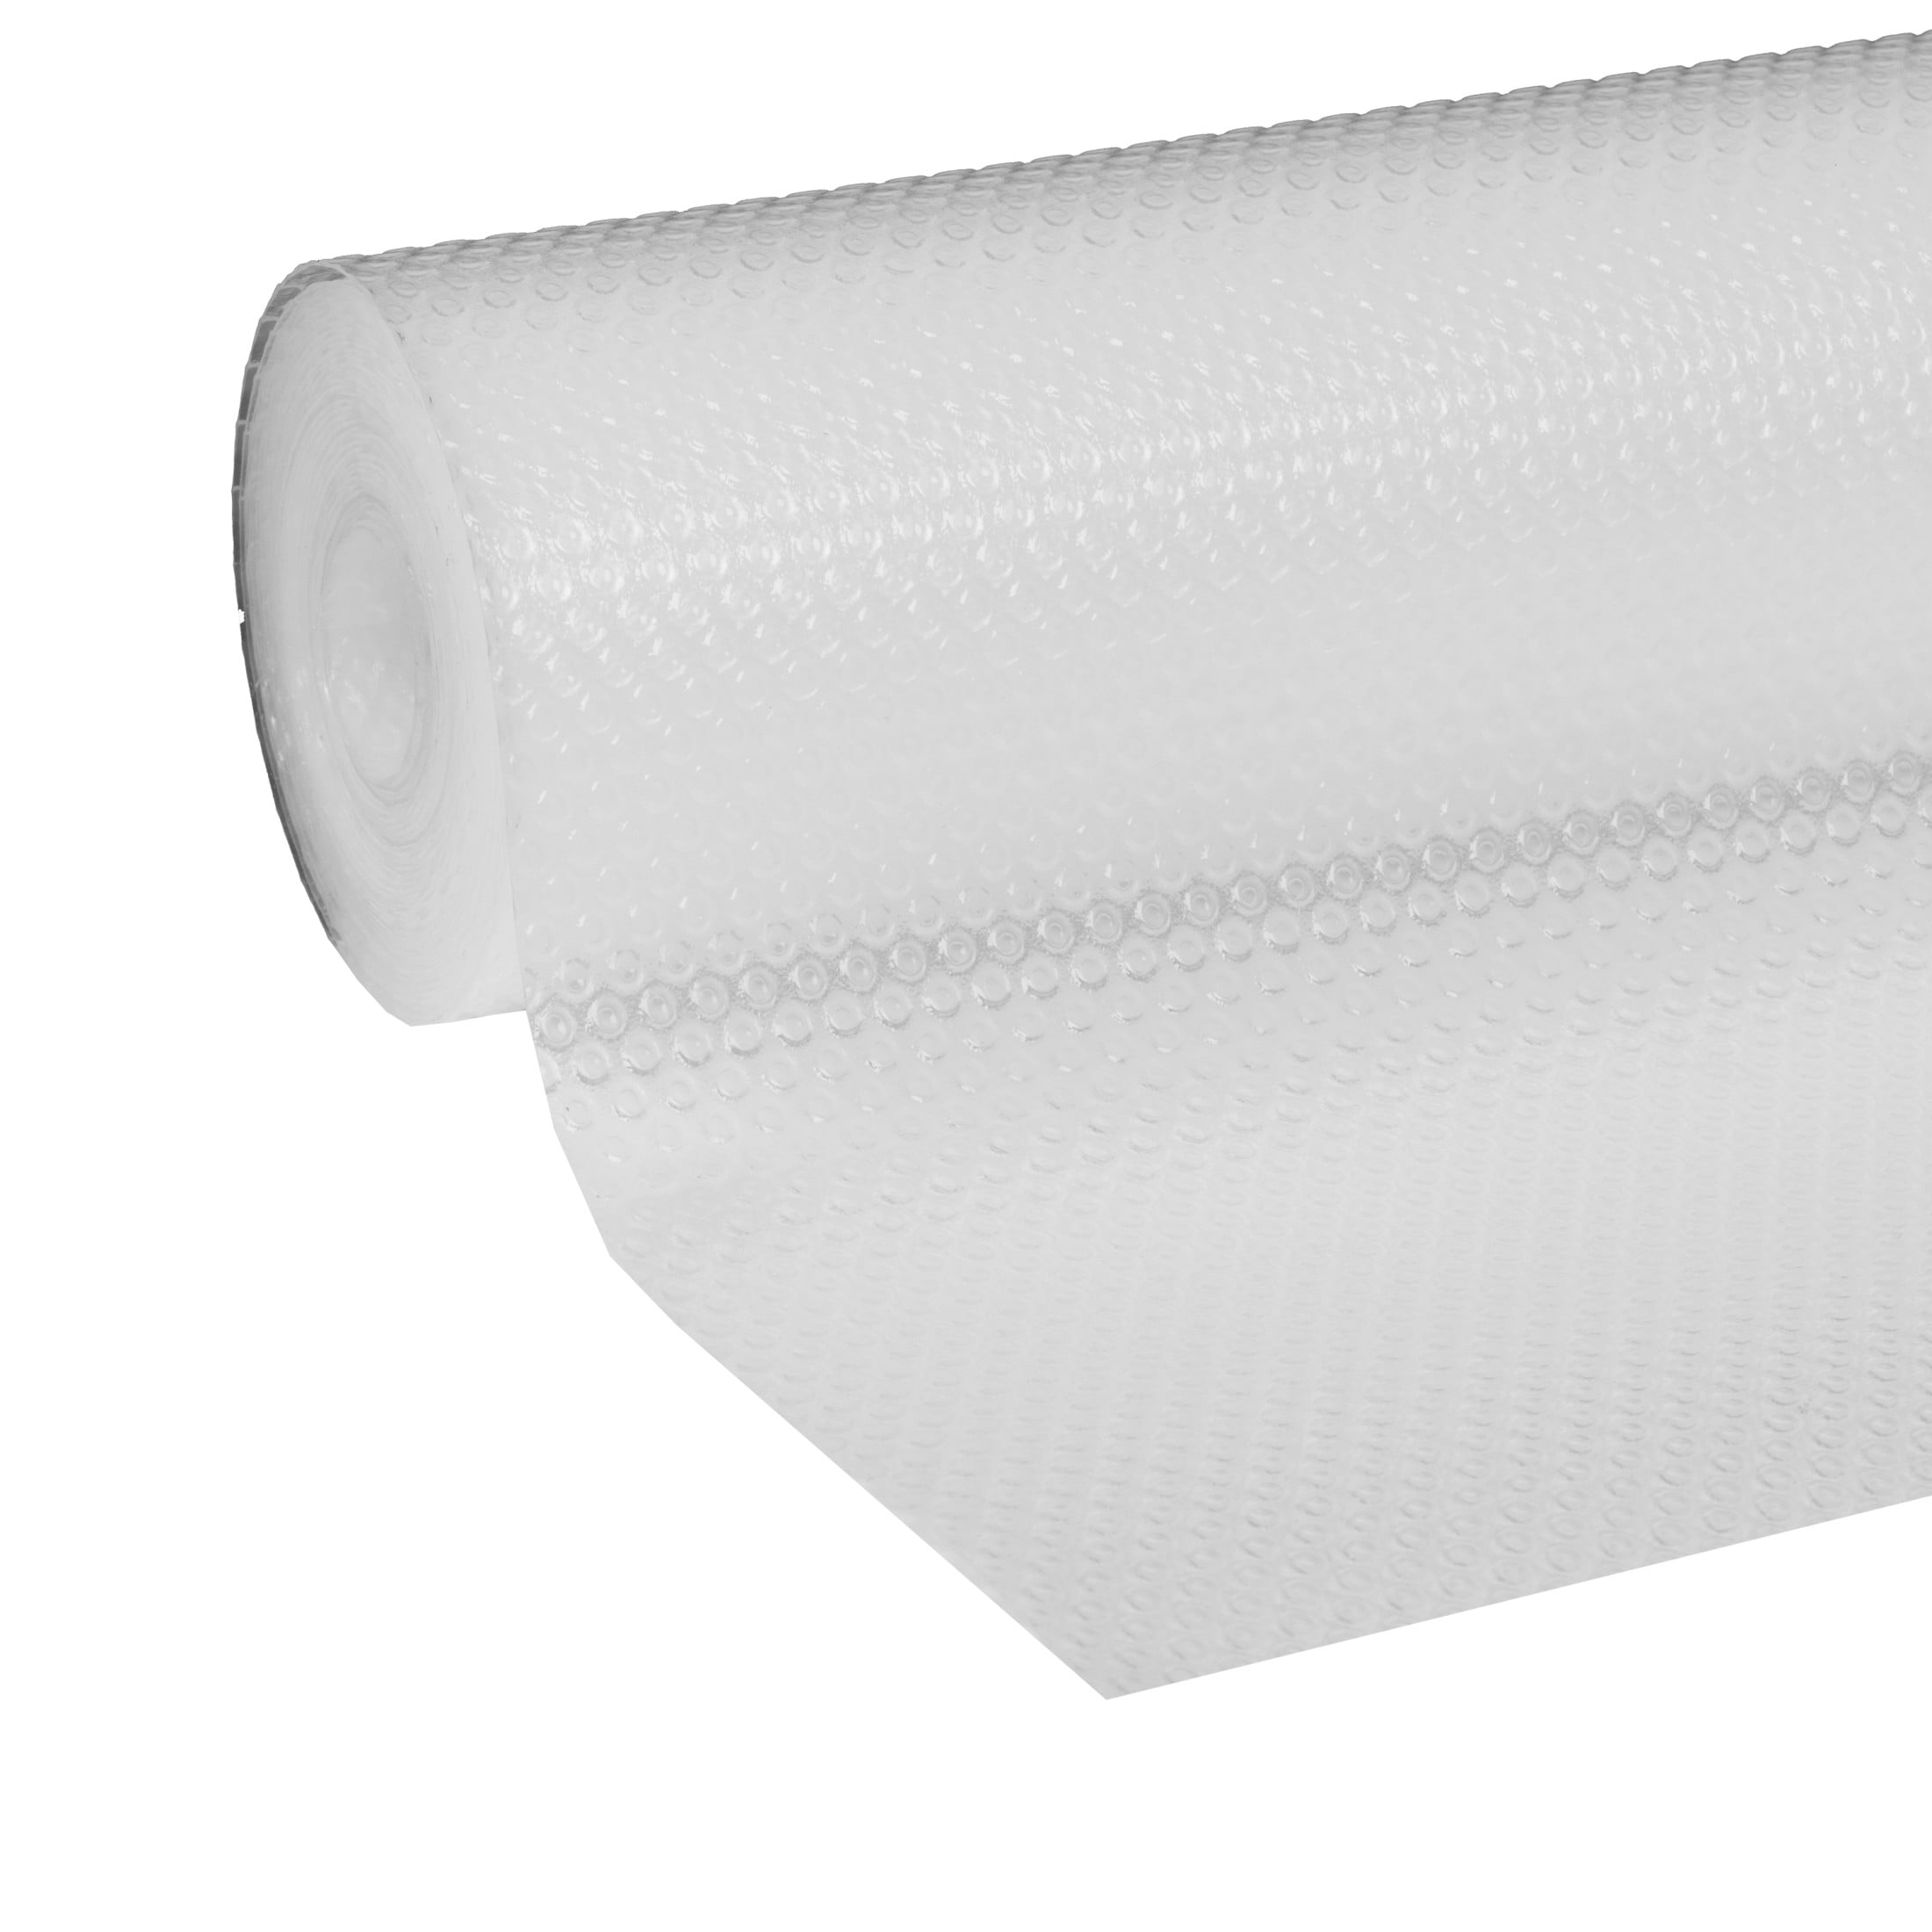 Shelf Liners for Kitchen Cabinets 15 Inch X 20 FT Non Adhesive